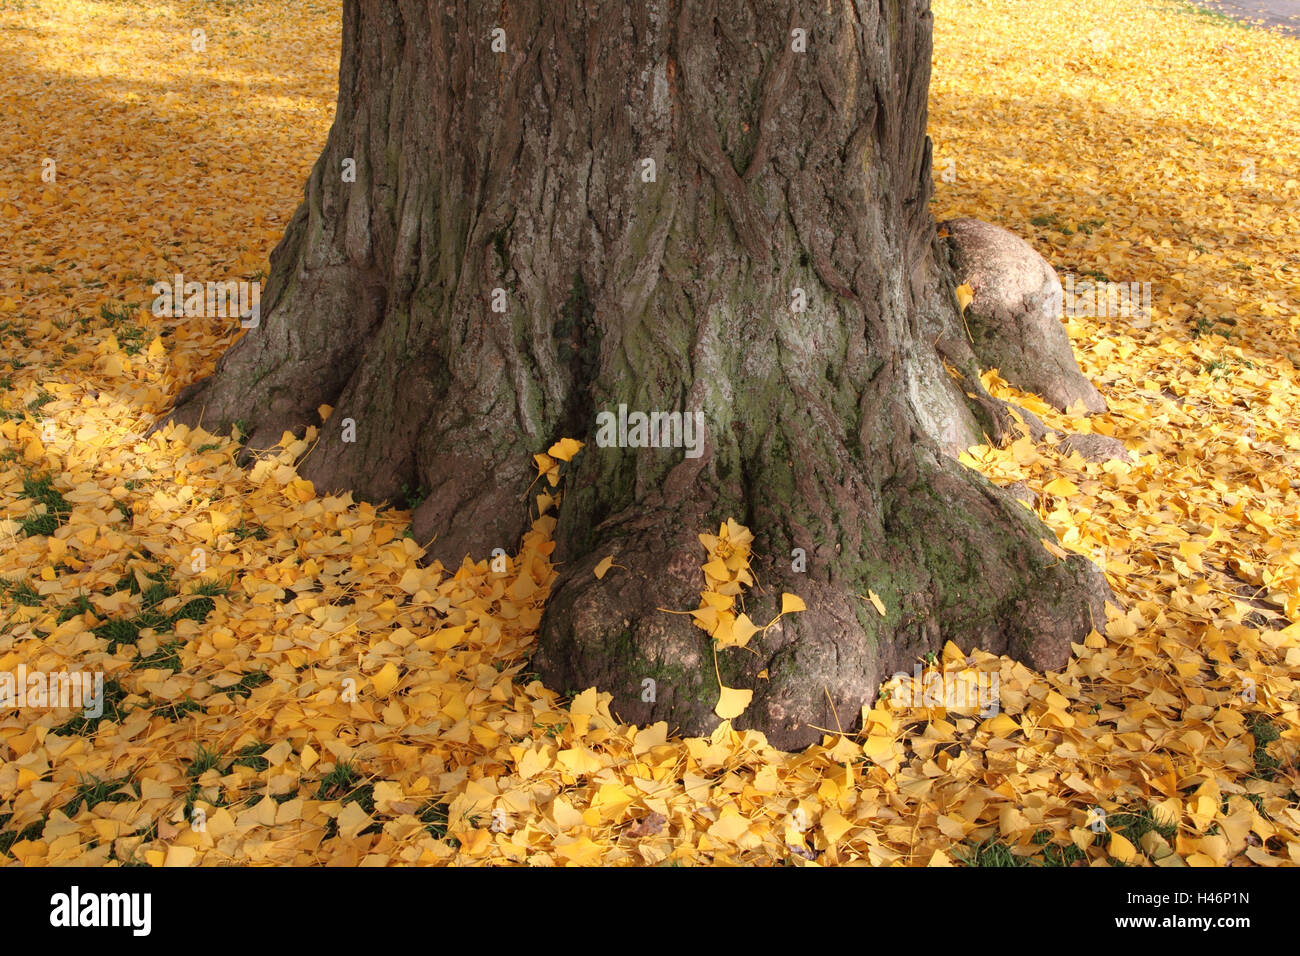 Ginkgo, leaves in the floor, autumn, Stock Photo